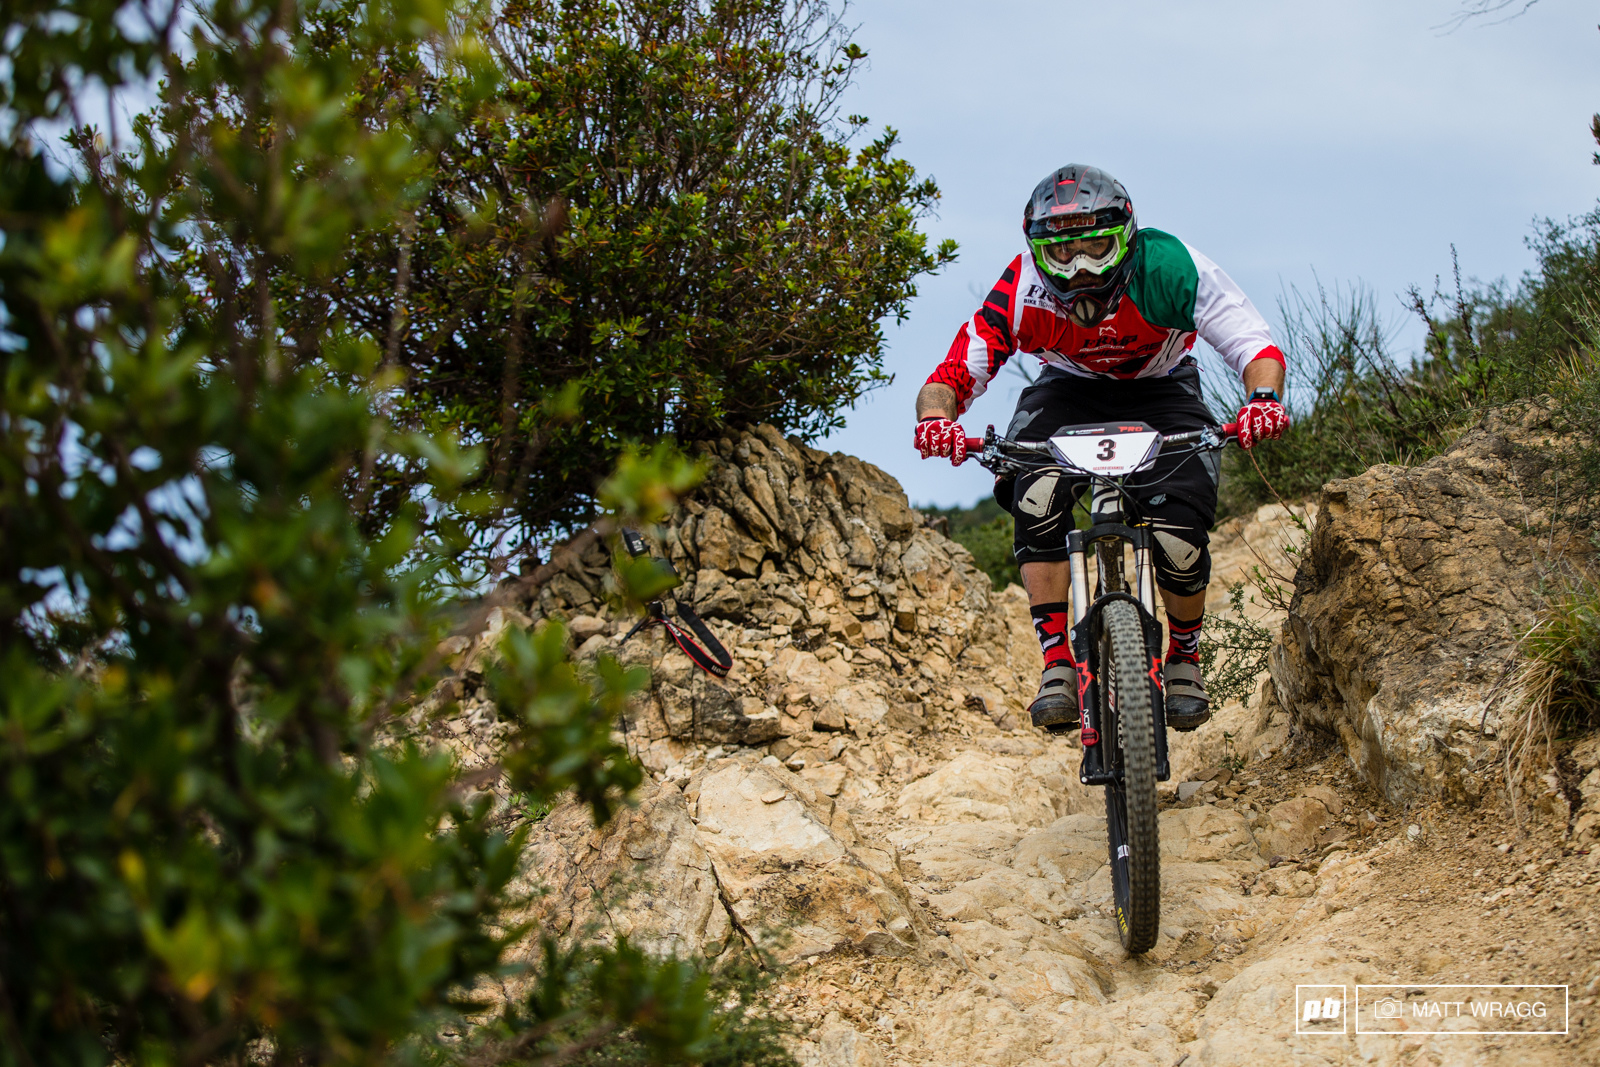 Alex Lupato looks like his winter training has been good, but he didn't have quite enough to overtake Marco Milivintis overnight lead, settling for a solid second place before he jets off the Chile for the EWS this week.